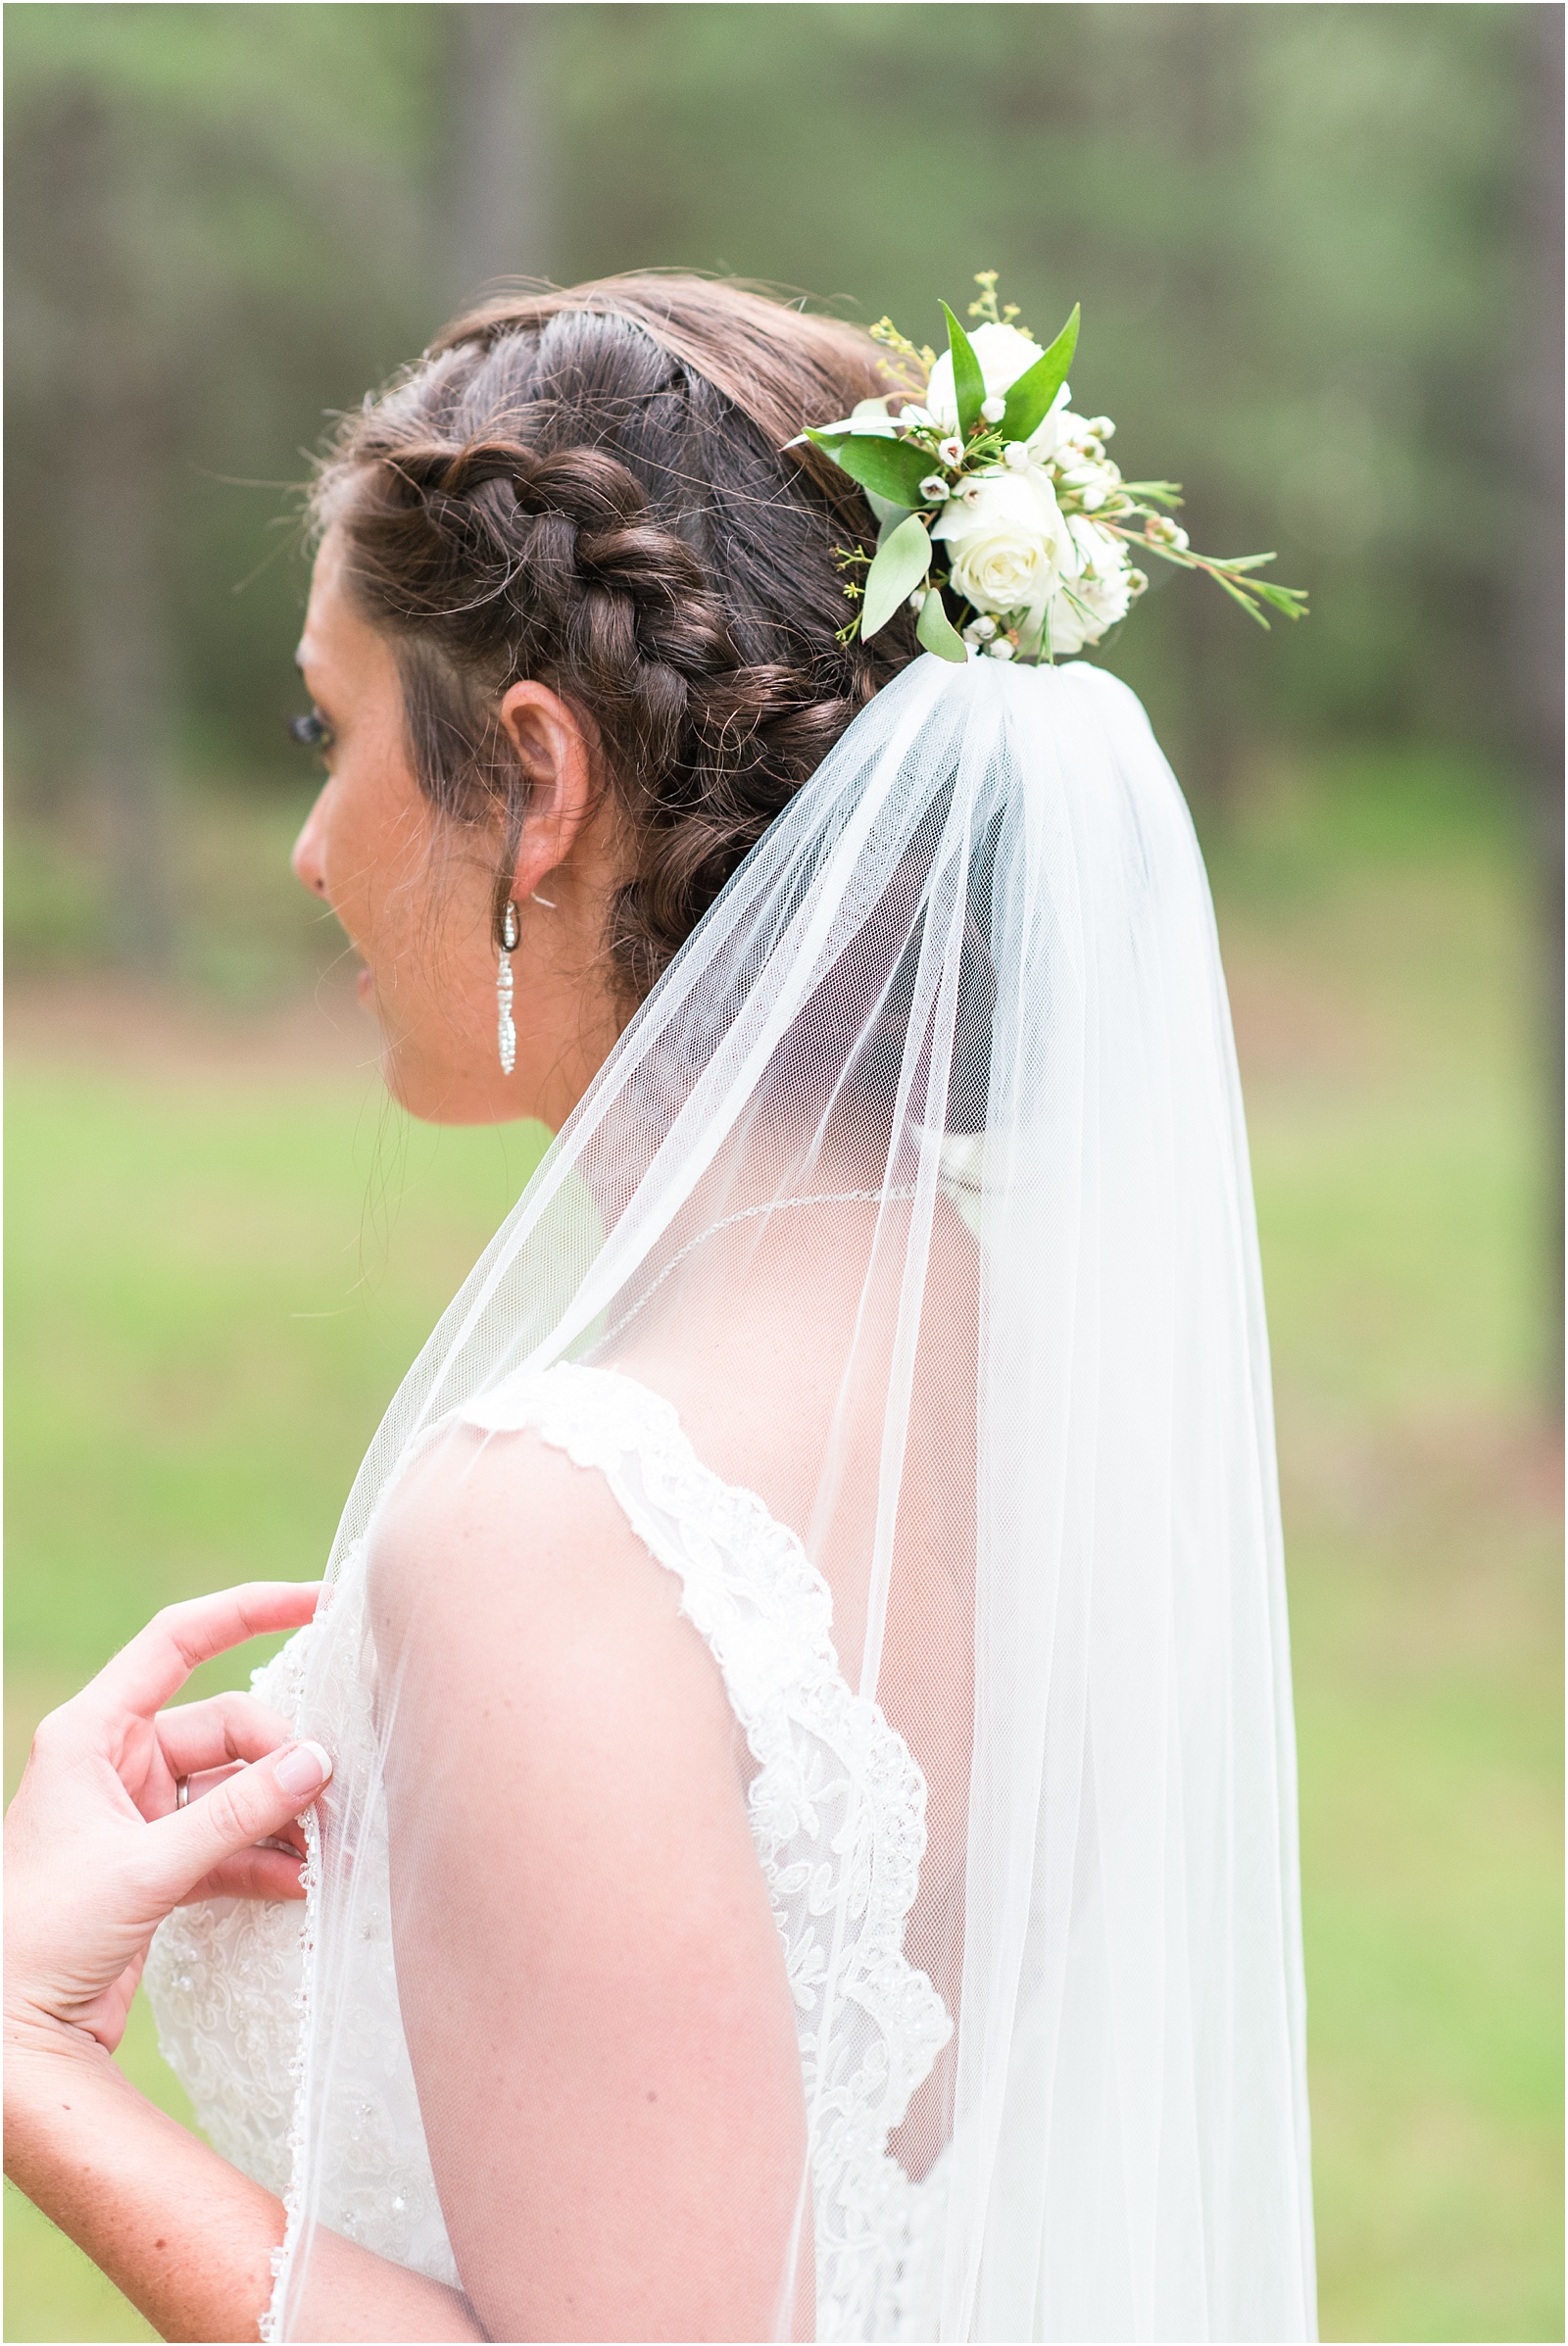 the back of the bride hair and veil details with white and green floral pin outside, Meadows At Walnut Cove, NC